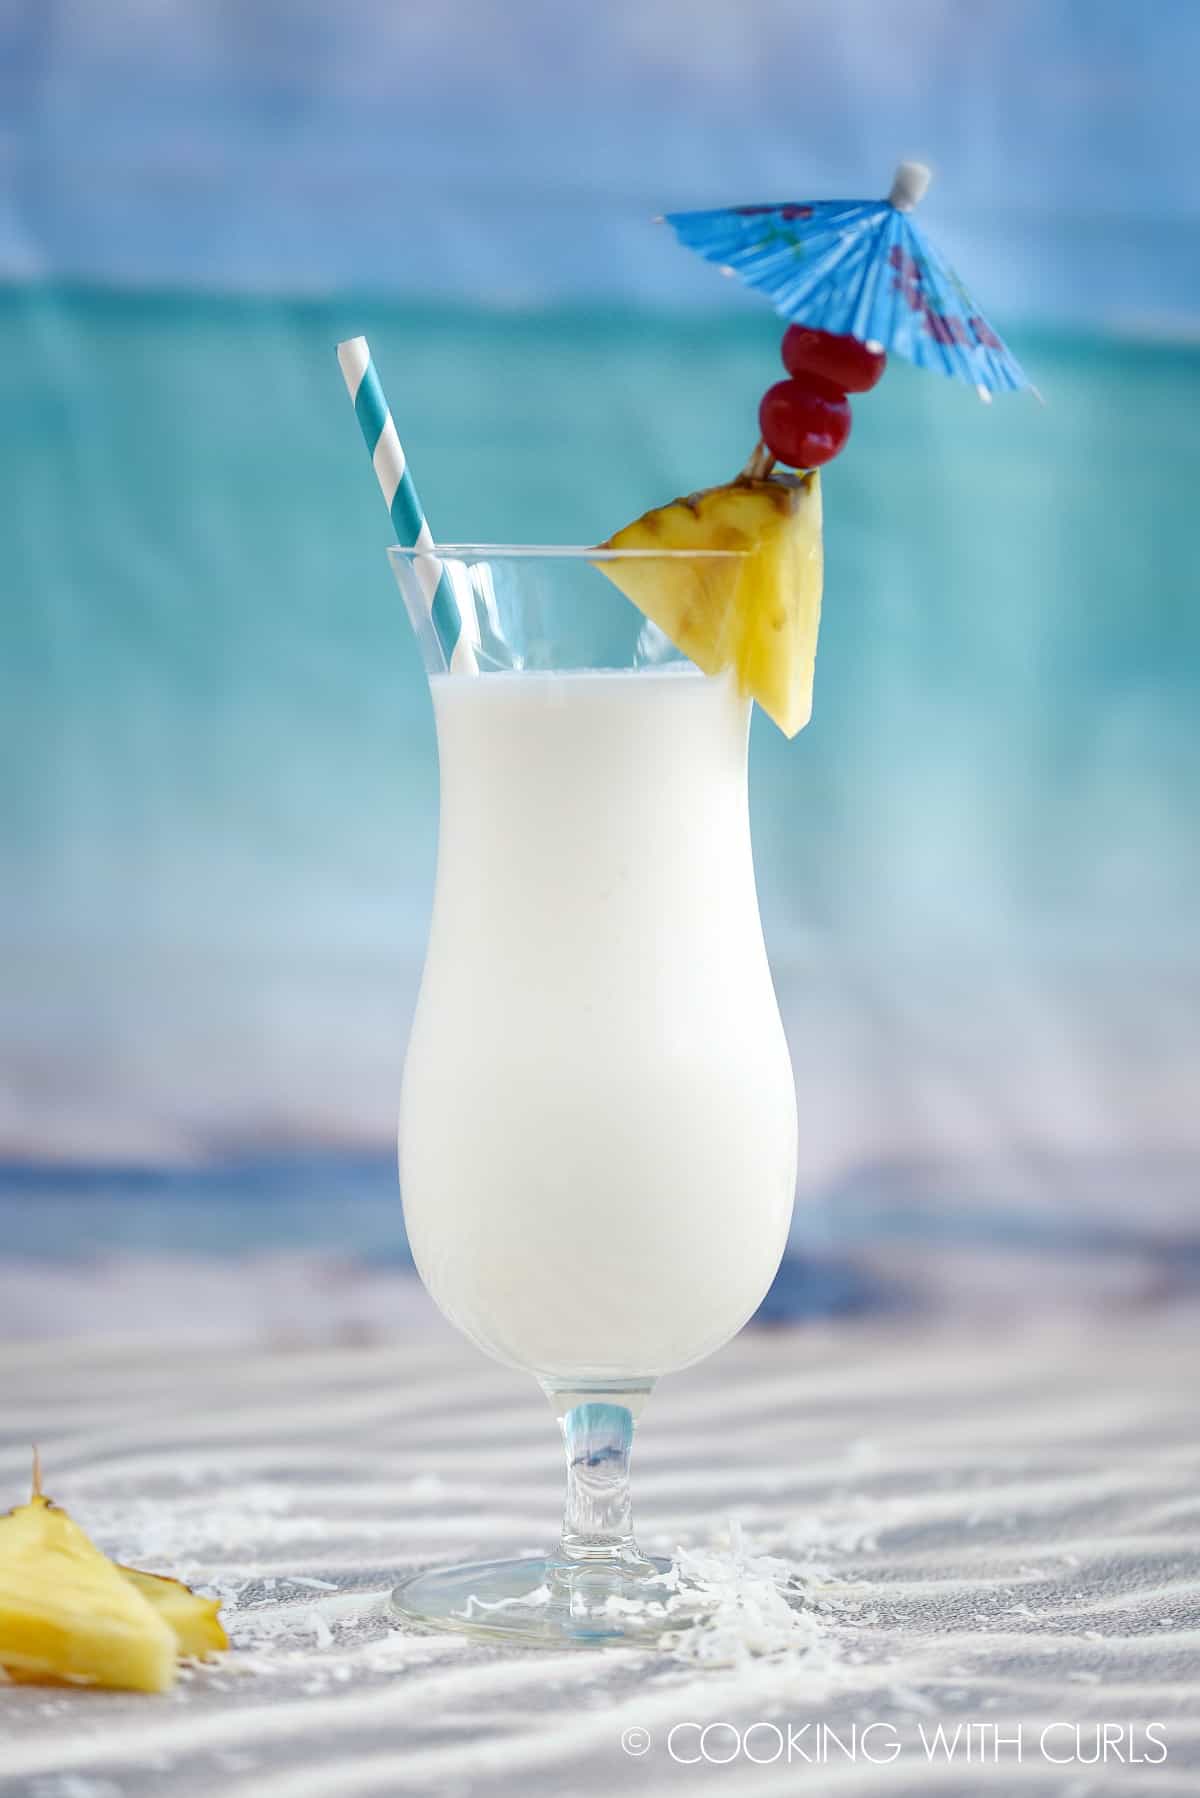 Creamy Pina Colada Milkshake in a hurricane glass garnished with a pineapple wedge, two cherries and a blue umbrella.